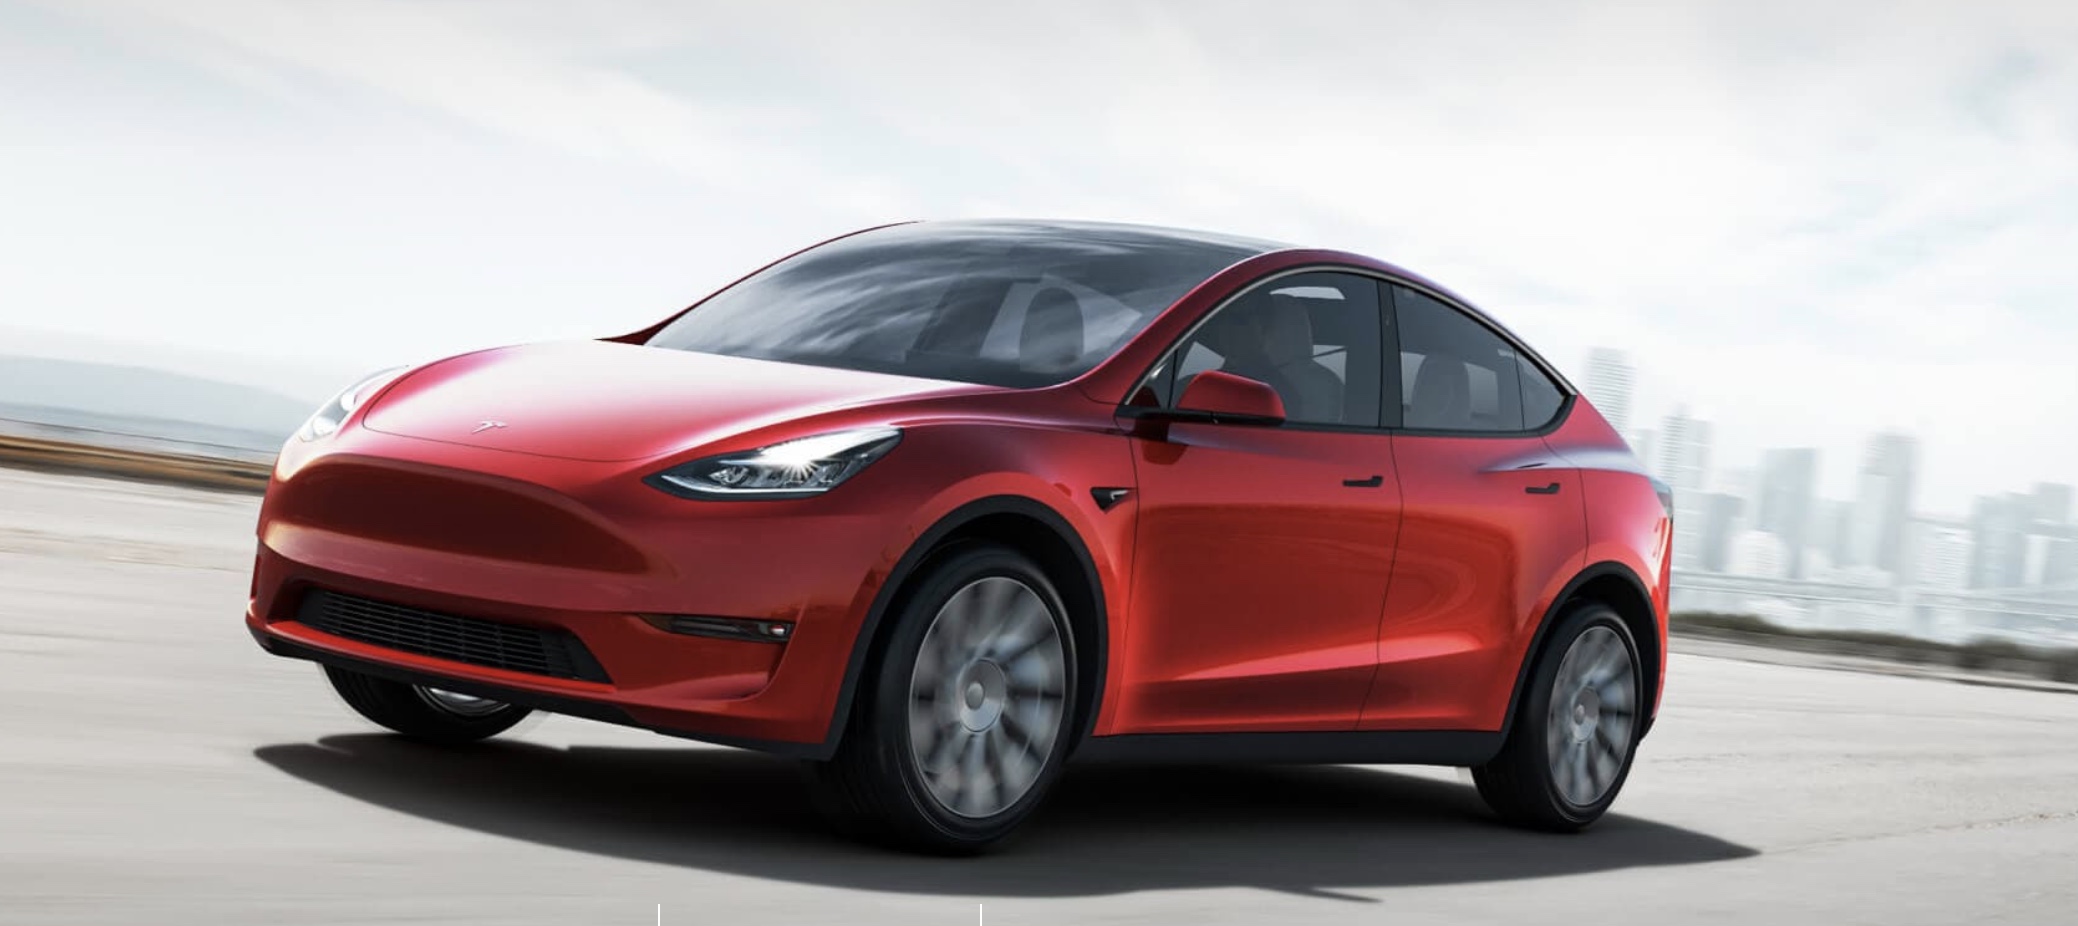 Tesla Model Y is now the world's best-selling car, first EV to do so